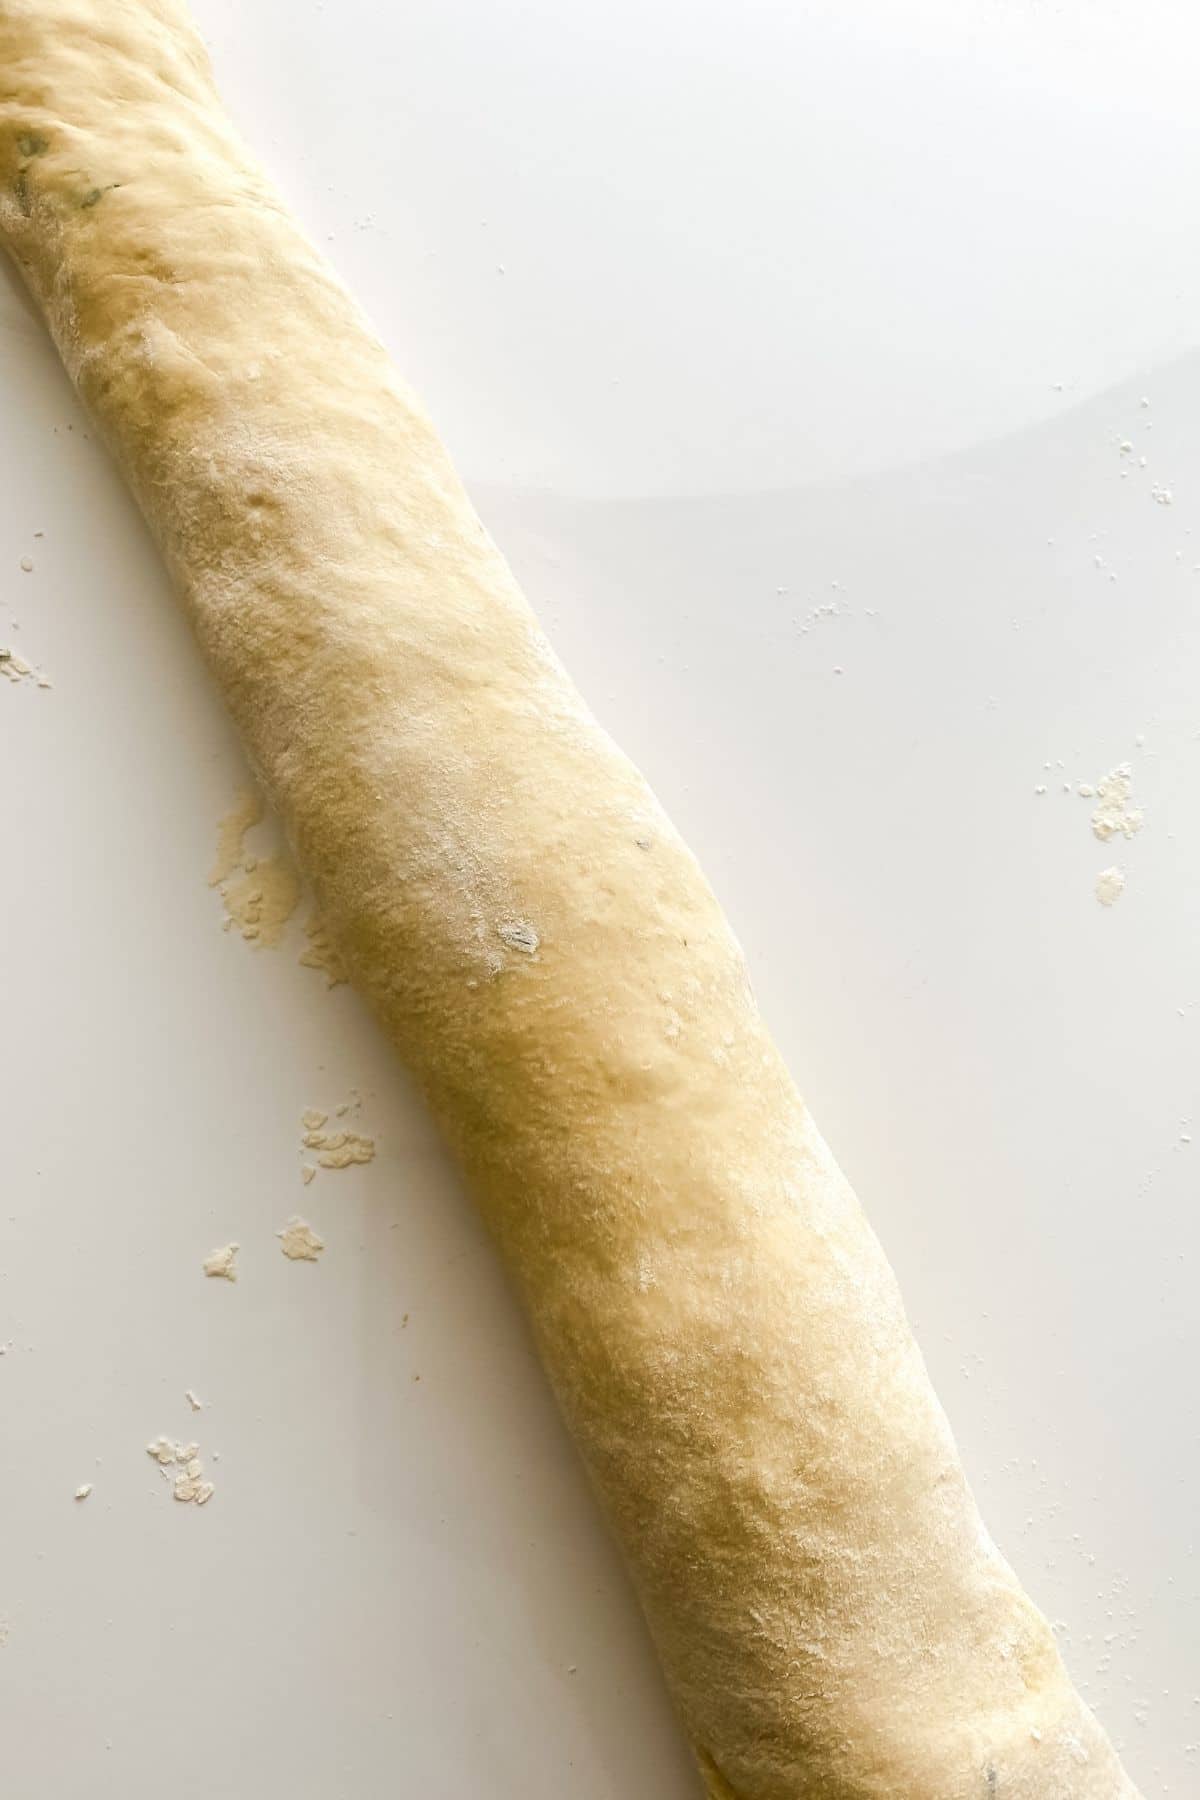 roll of bread dough on white counter